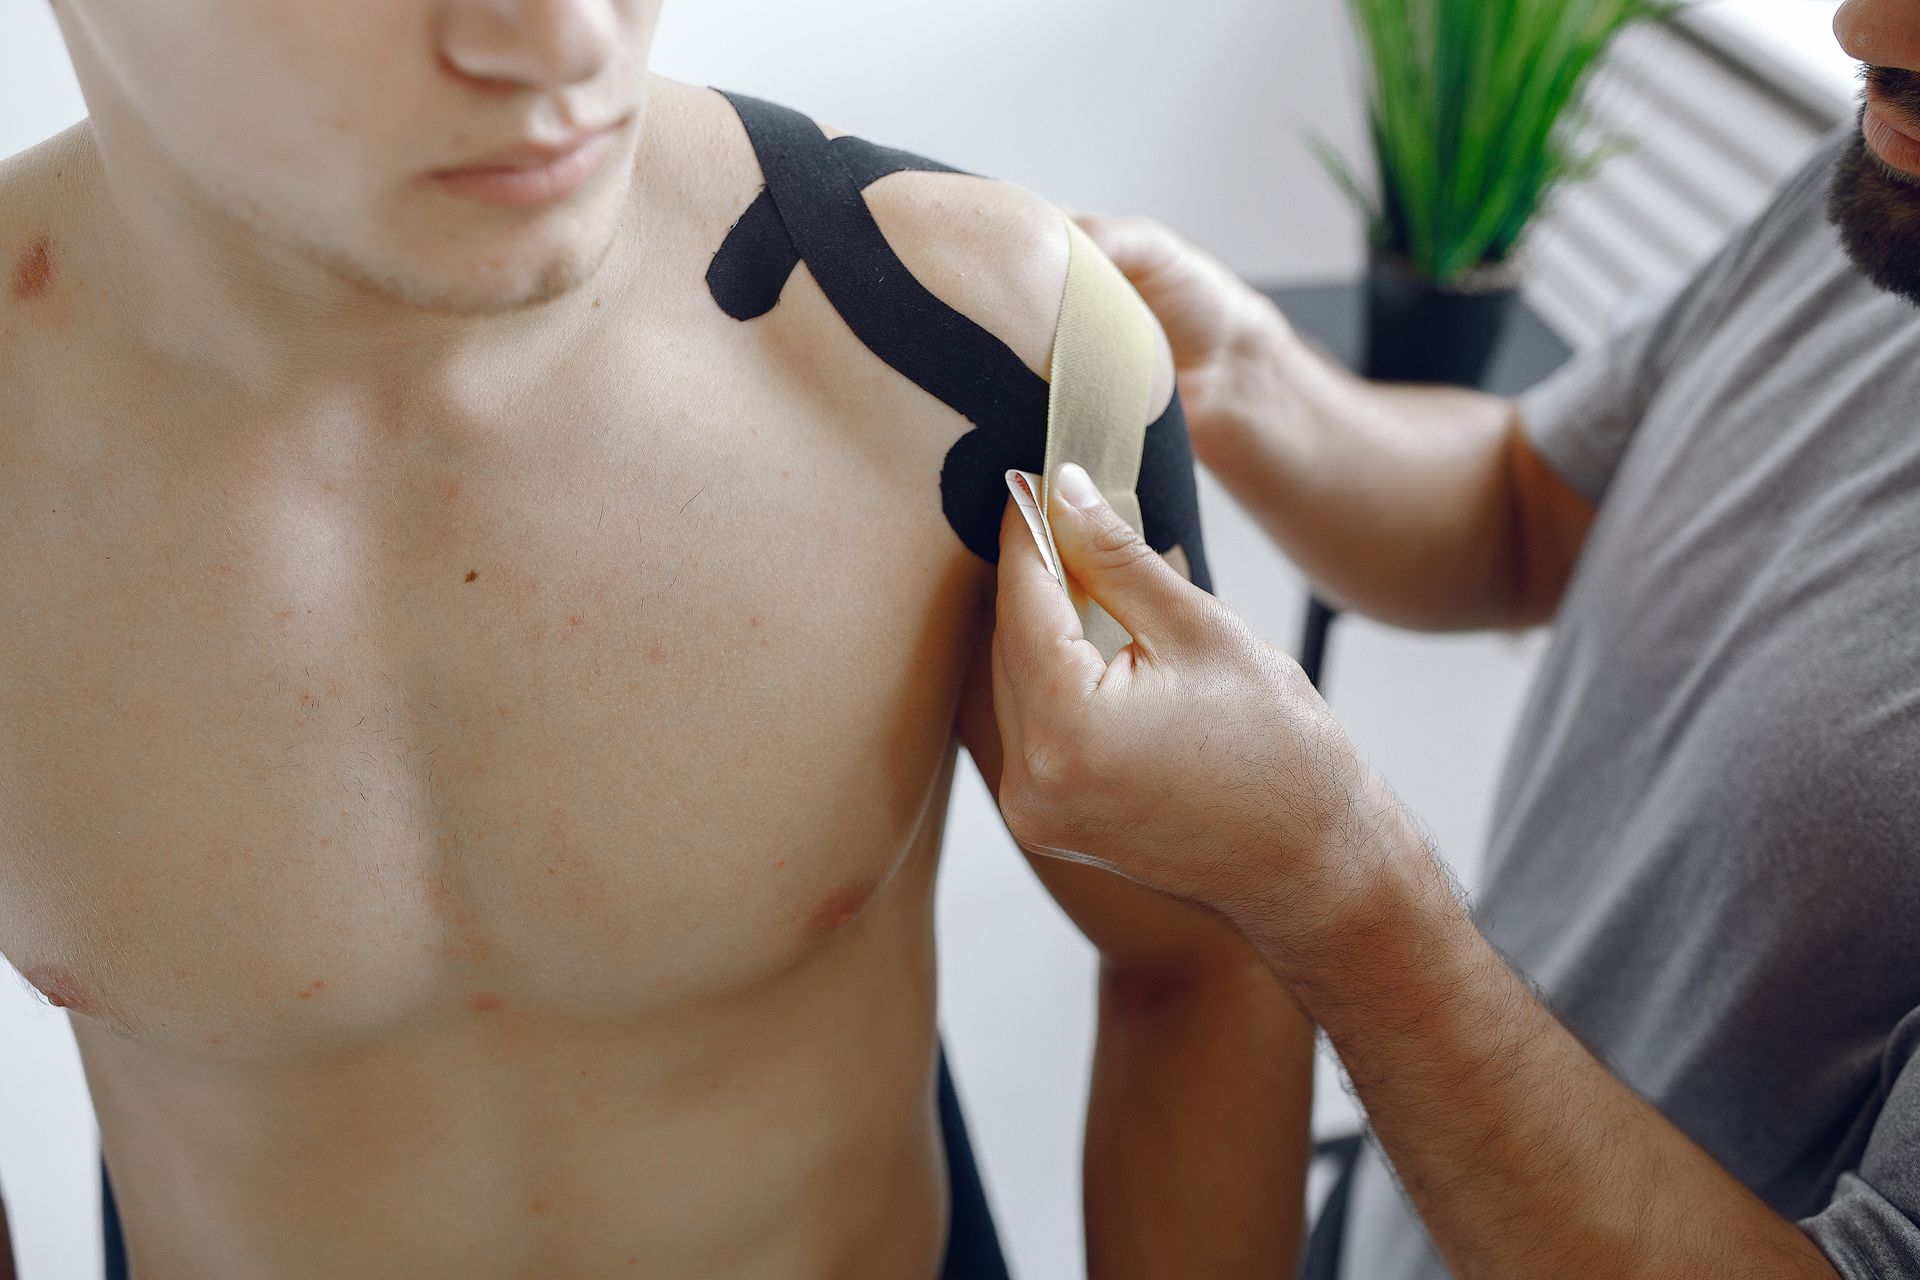 a shirtless man is getting kinesio tape on his shoulder